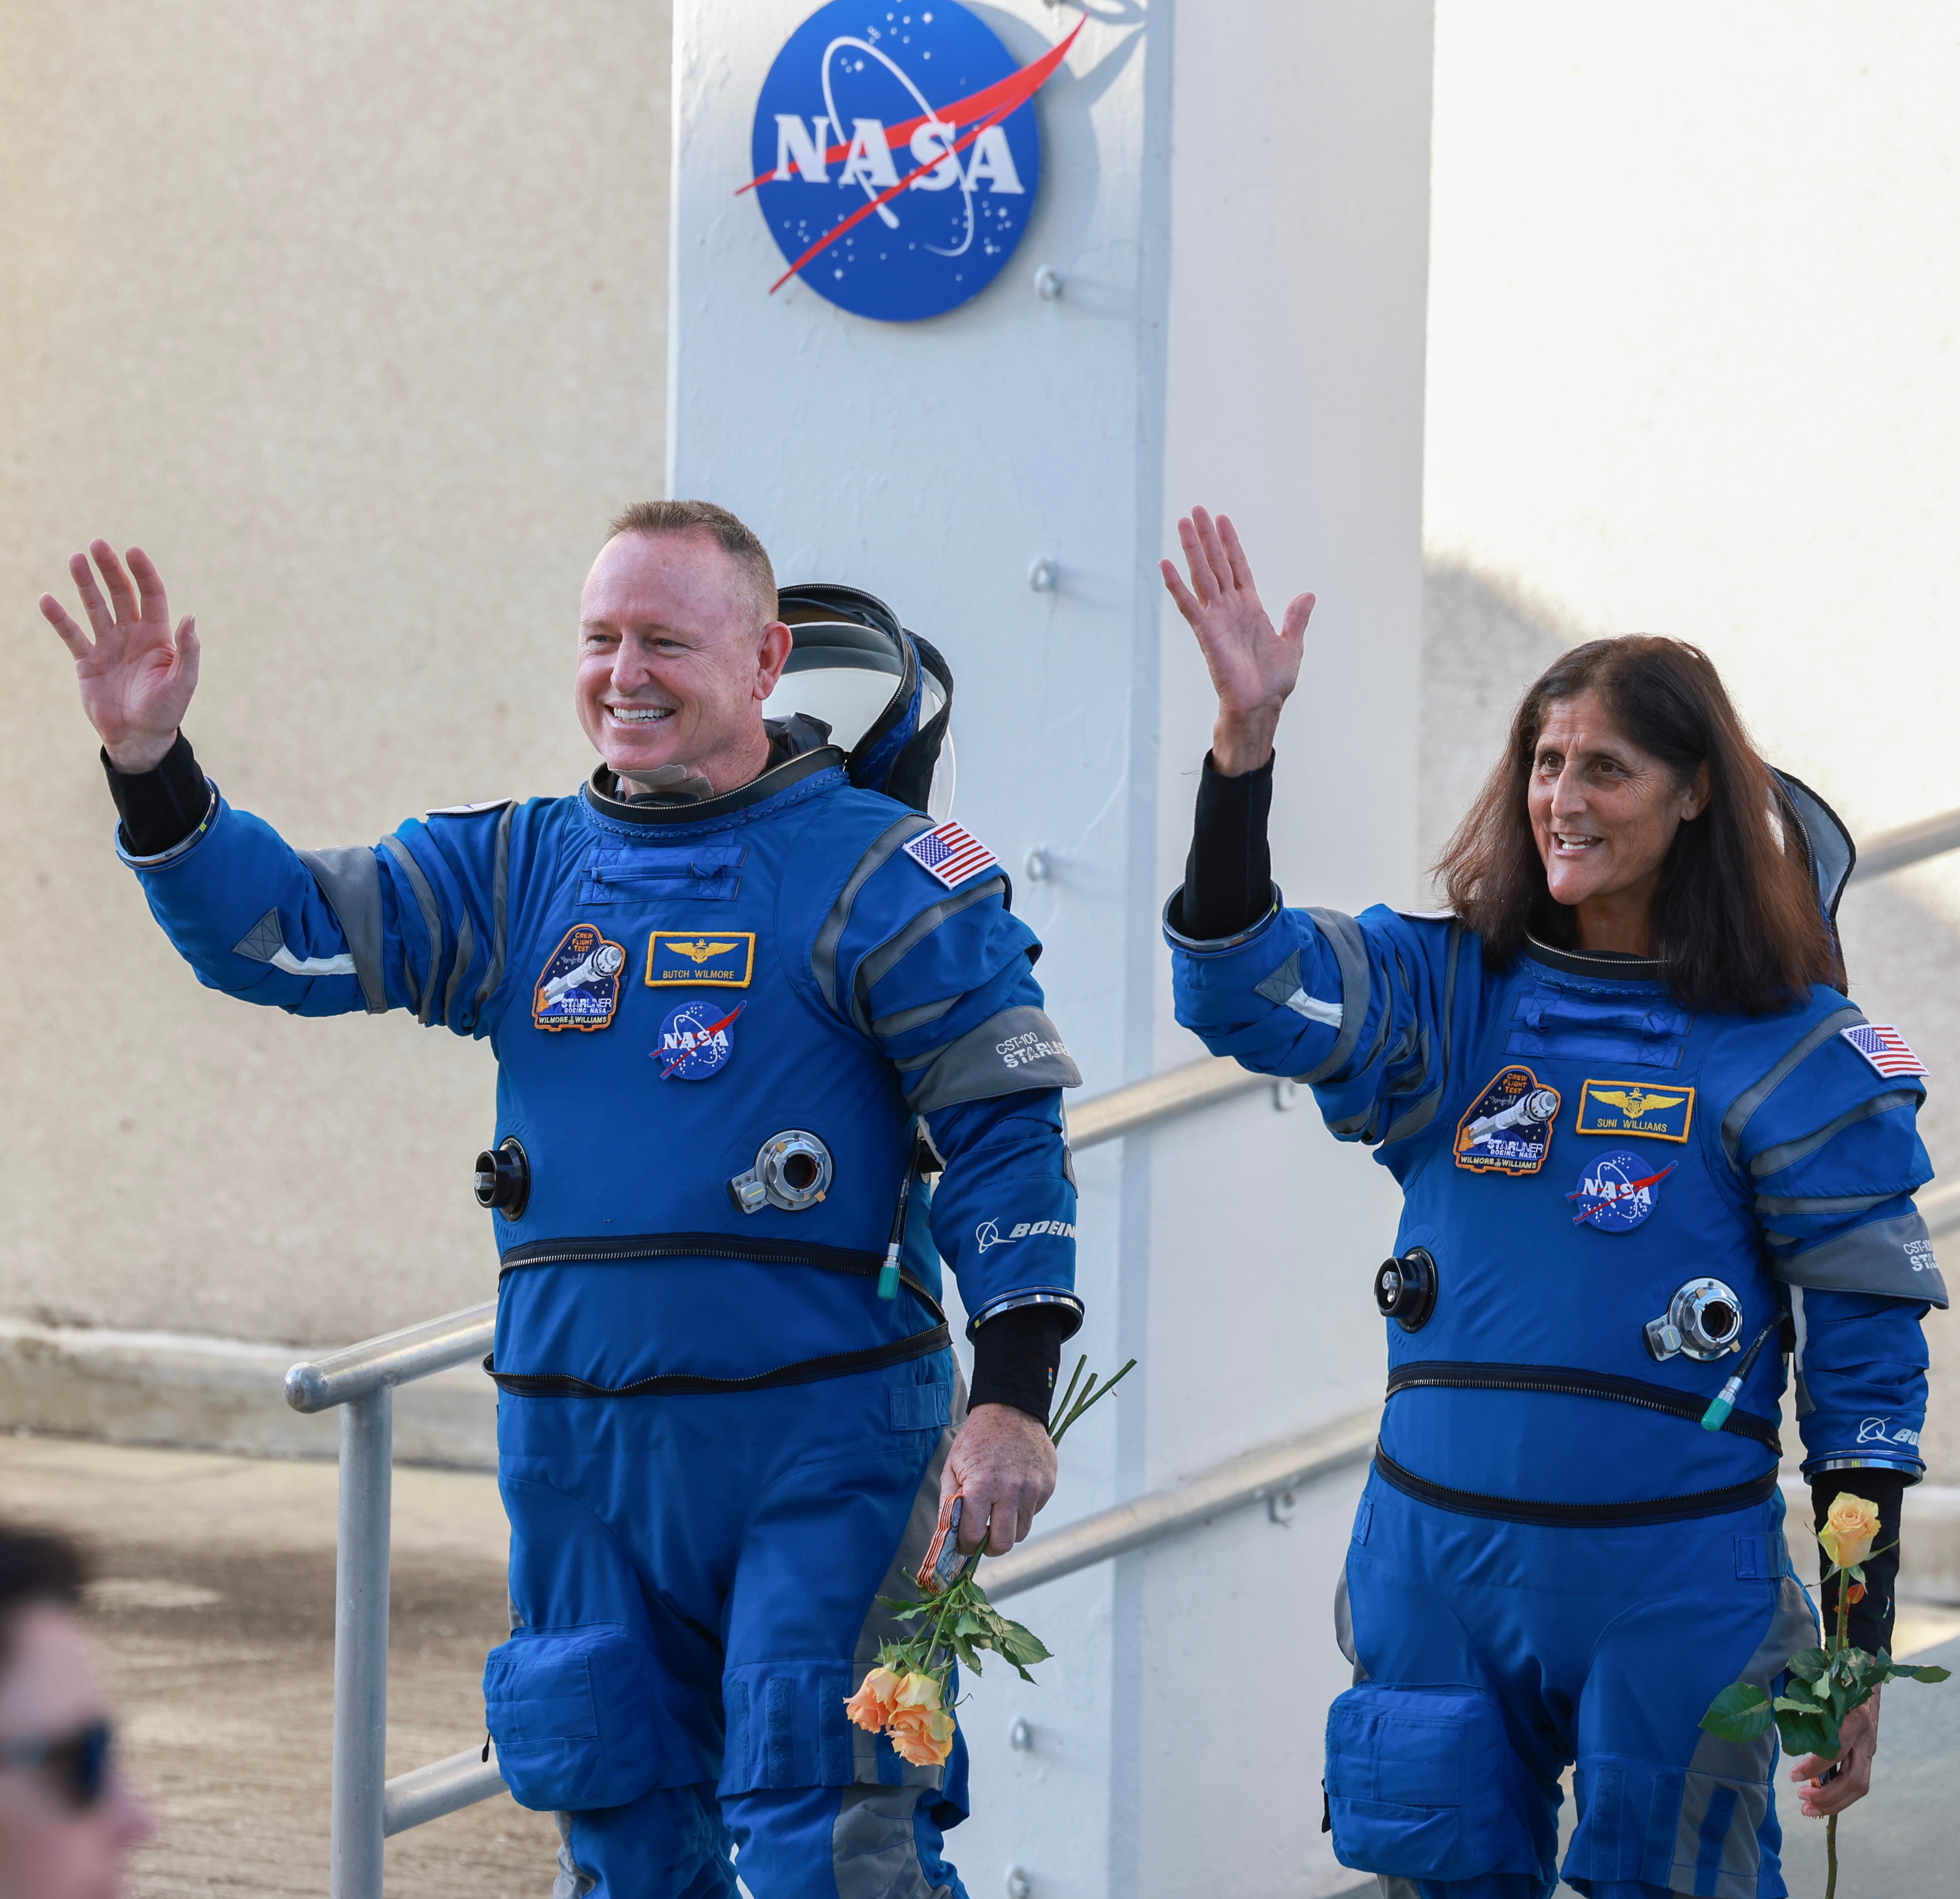 Butch Wilmore (left) and Williams (right) wave just before taking off in the Boeing Starliner spacecraft on June 5. Now, officials say their return to Earth will be delayed until at least June 26